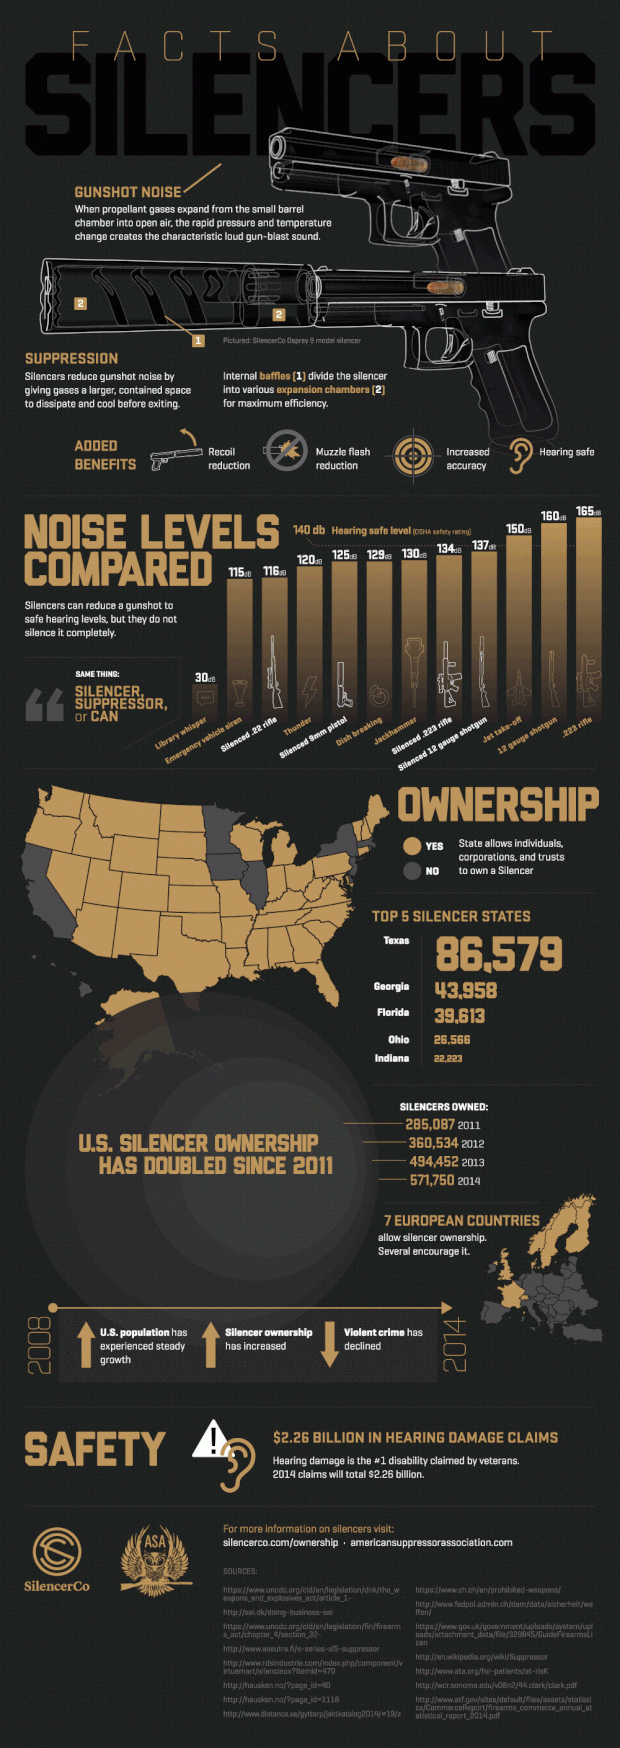 Facts About Silencers - SilencerCo